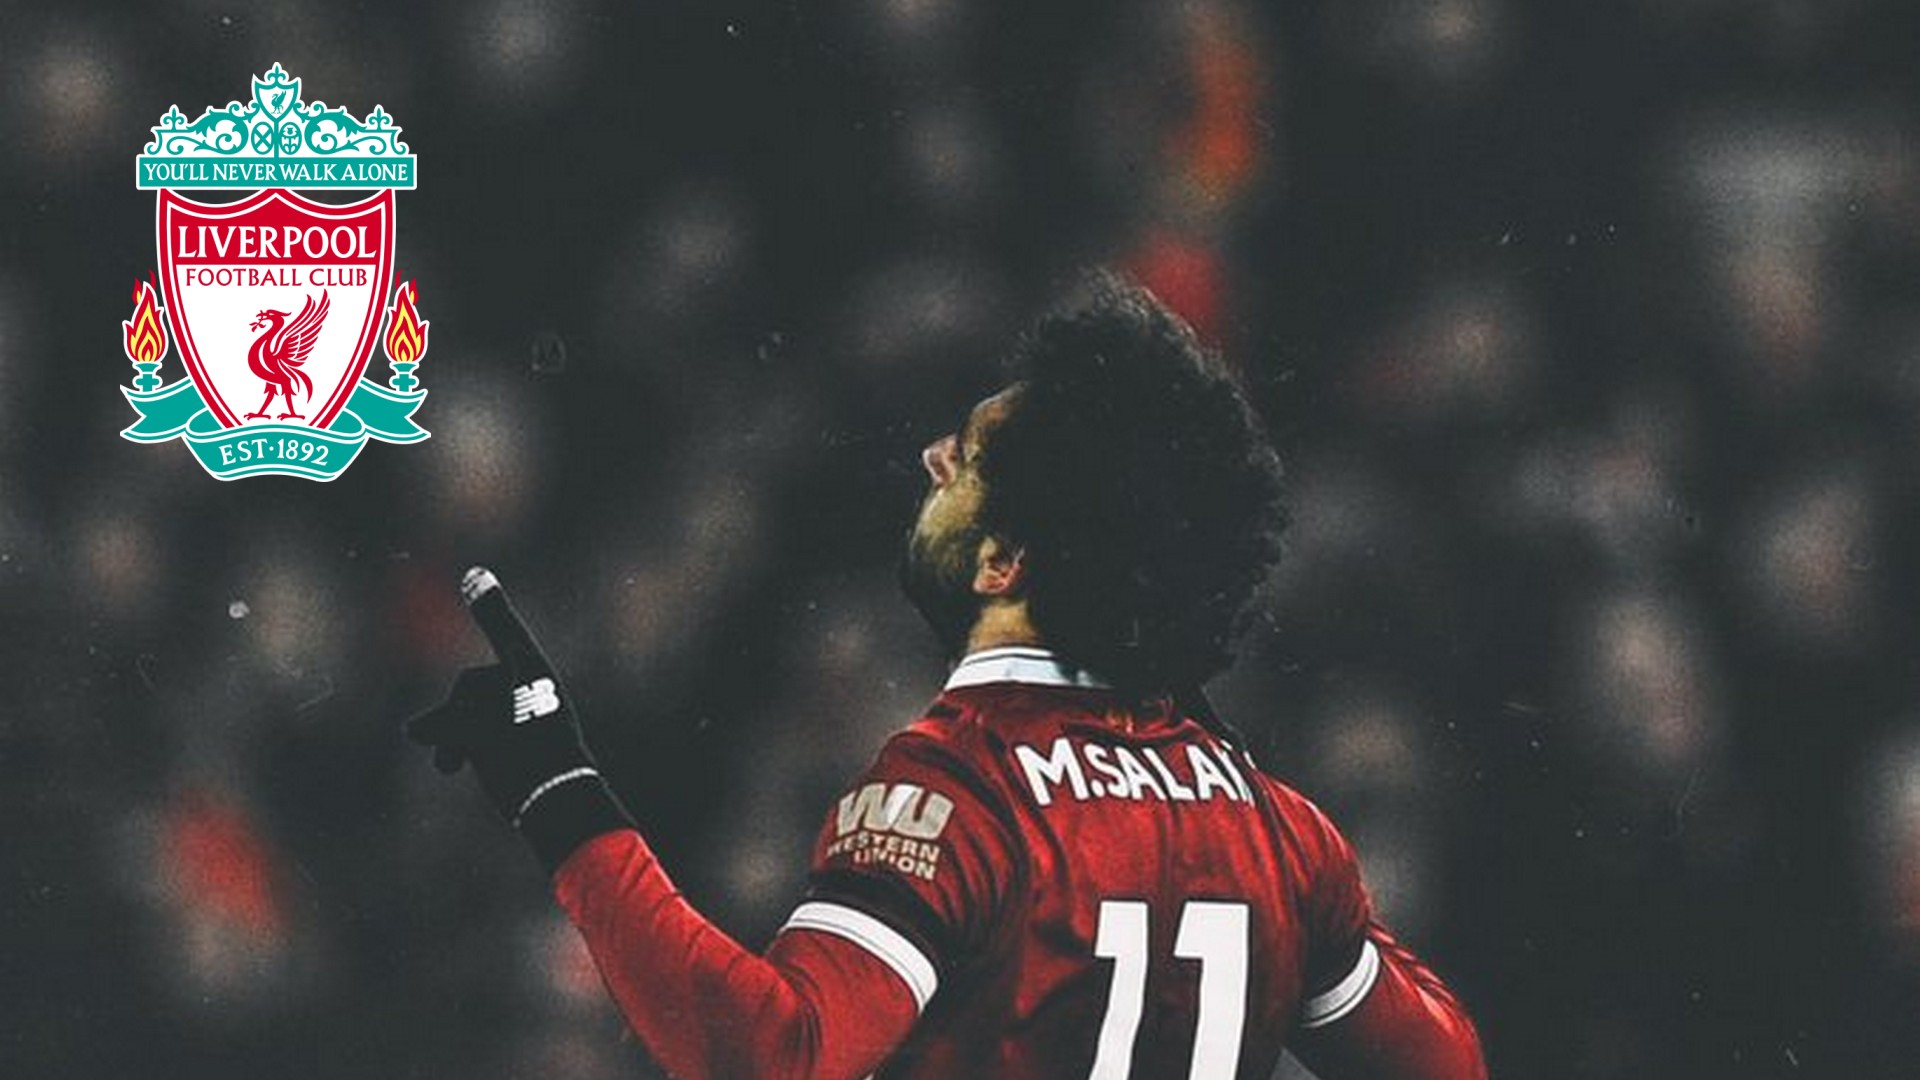 Best Mohamed Salah Wallpaper HD with image resolution 1920x1080 pixel. You can make this wallpaper for your Desktop Computer Backgrounds, Mac Wallpapers, Android Lock screen or iPhone Screensavers